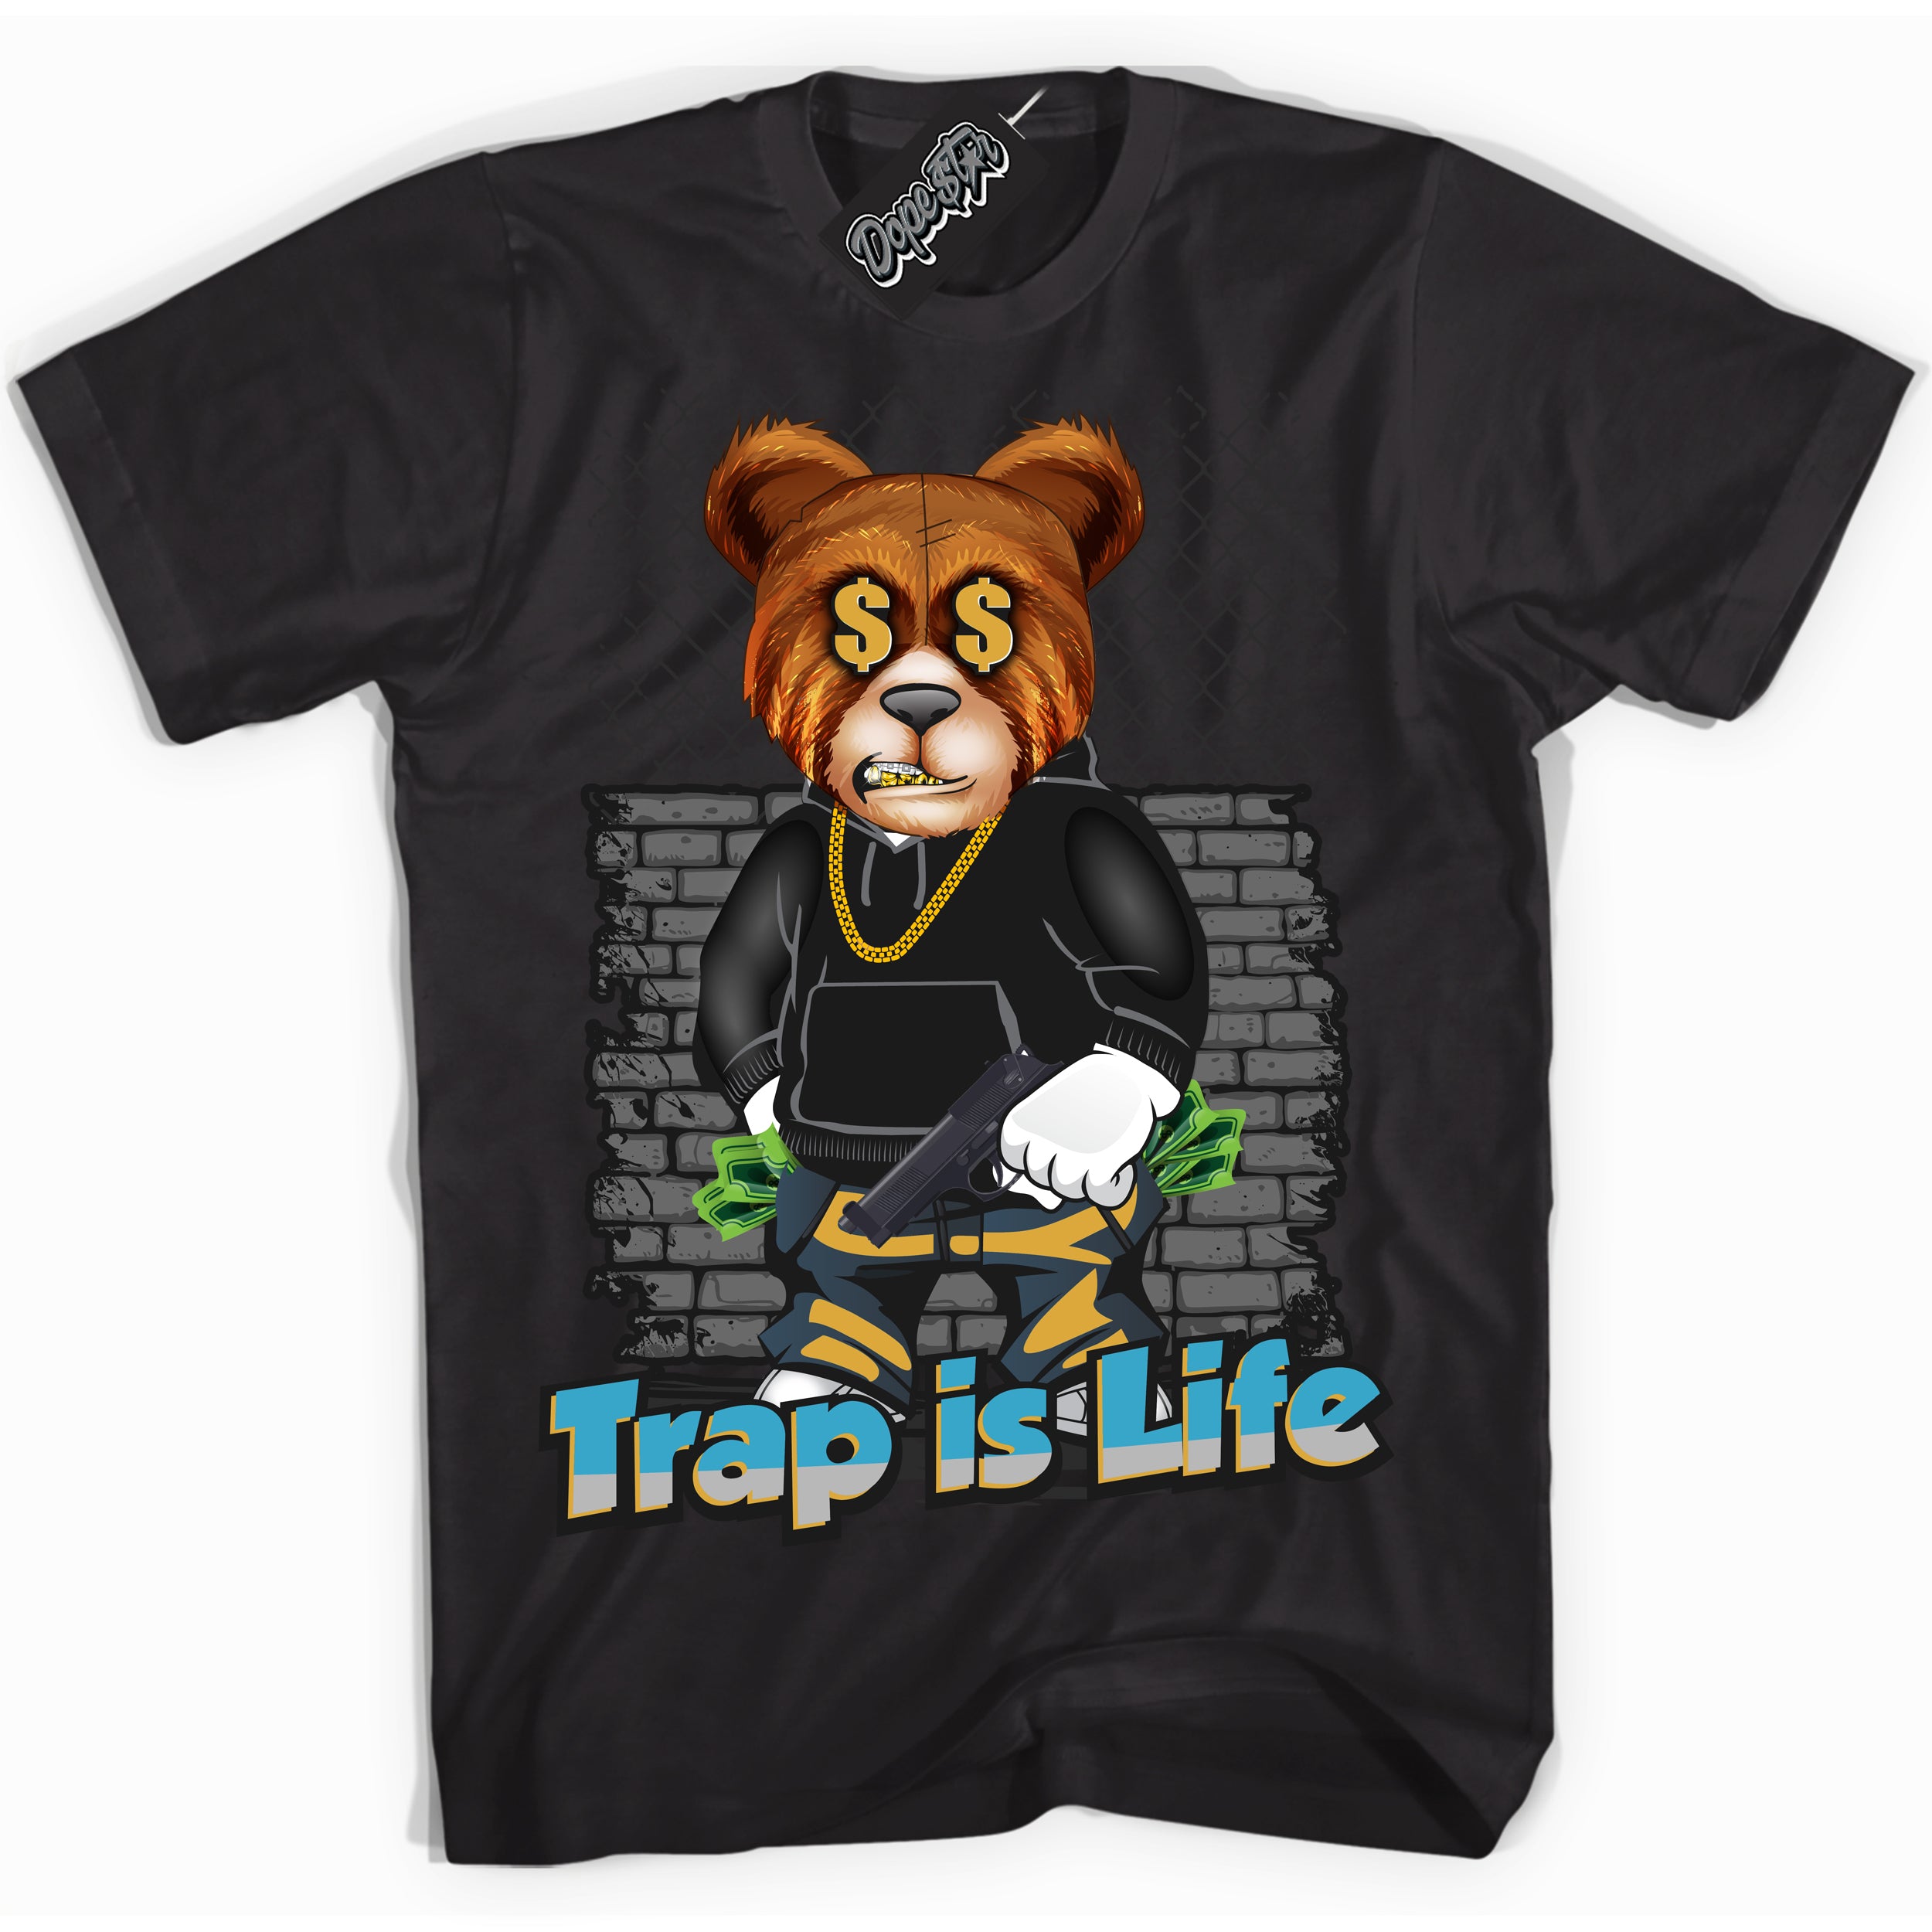 Cool Black Shirt with “ Trap Is Life” design that perfectly matches Aqua 5s Sneakers.